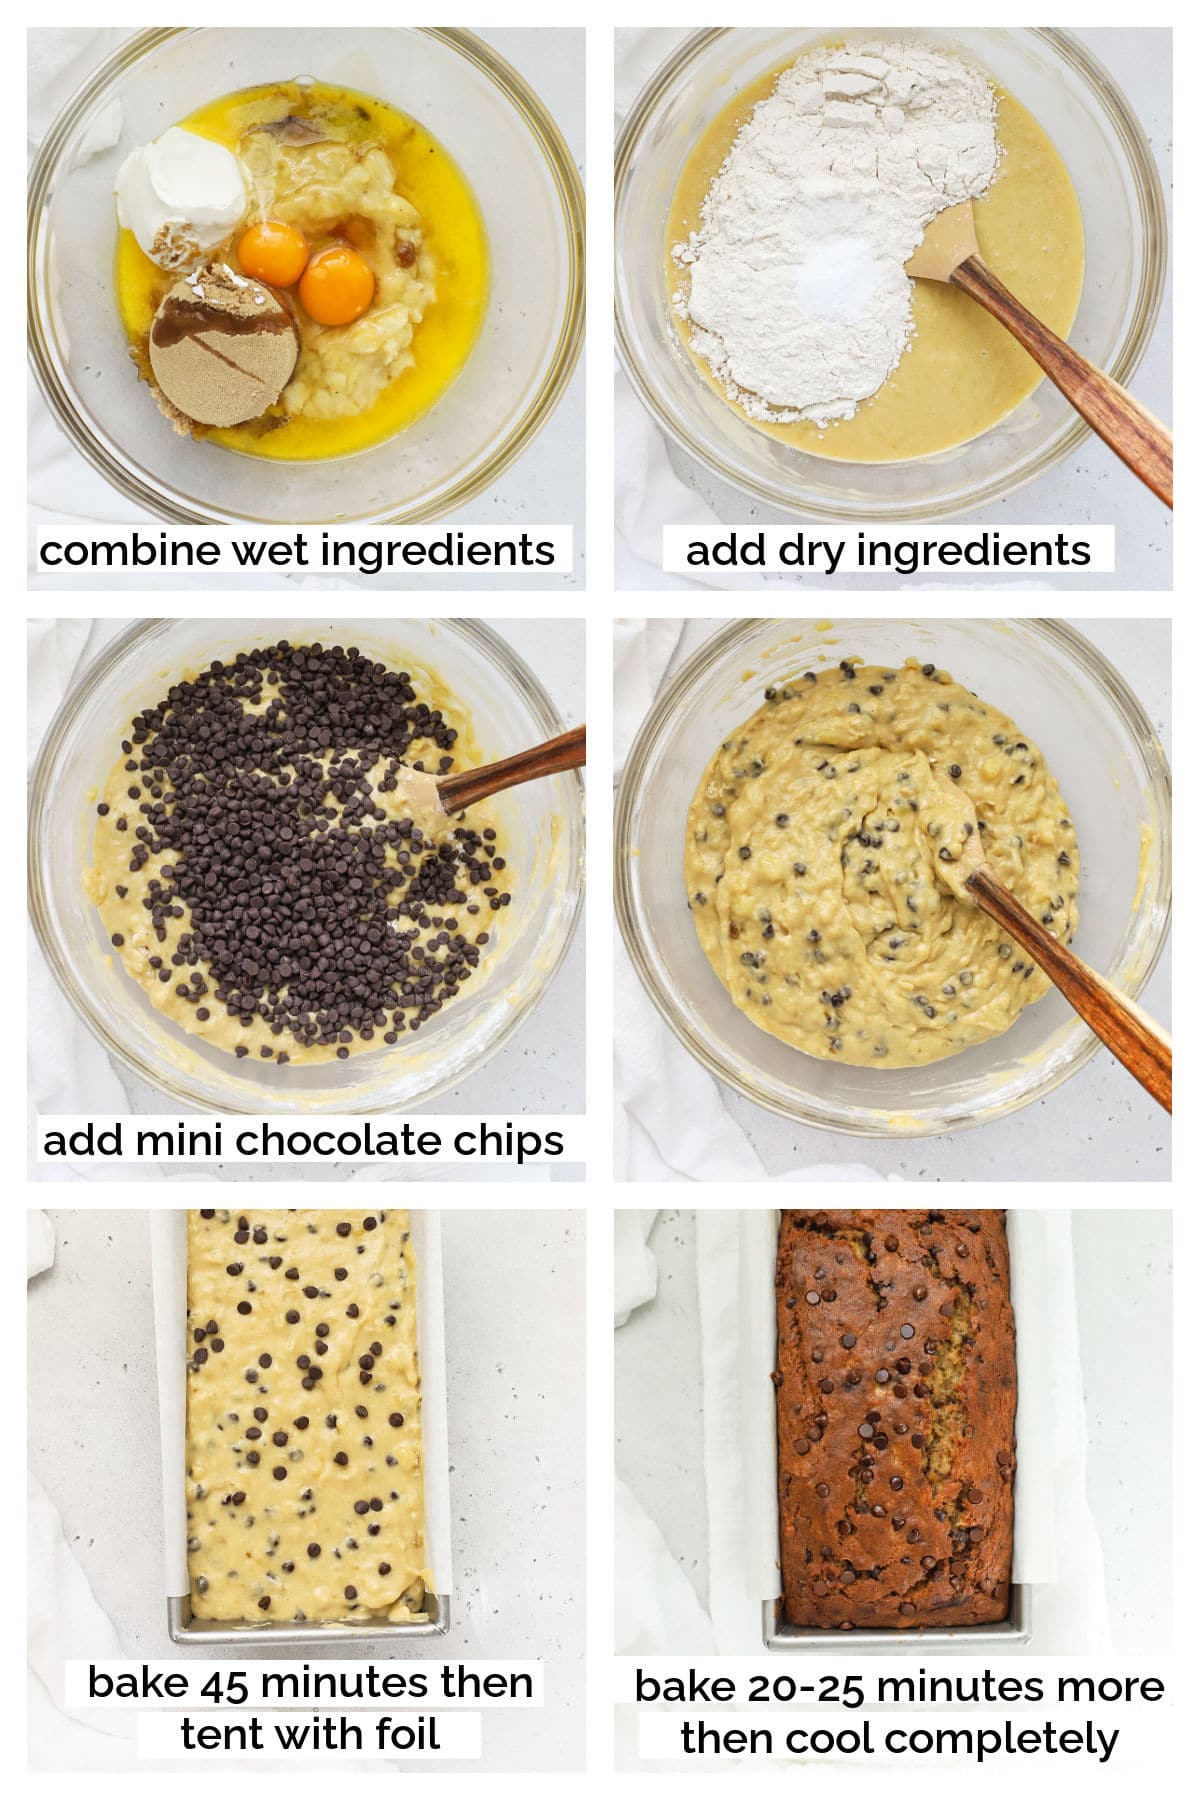 making gluten-free chocolate chip banana bread step by step